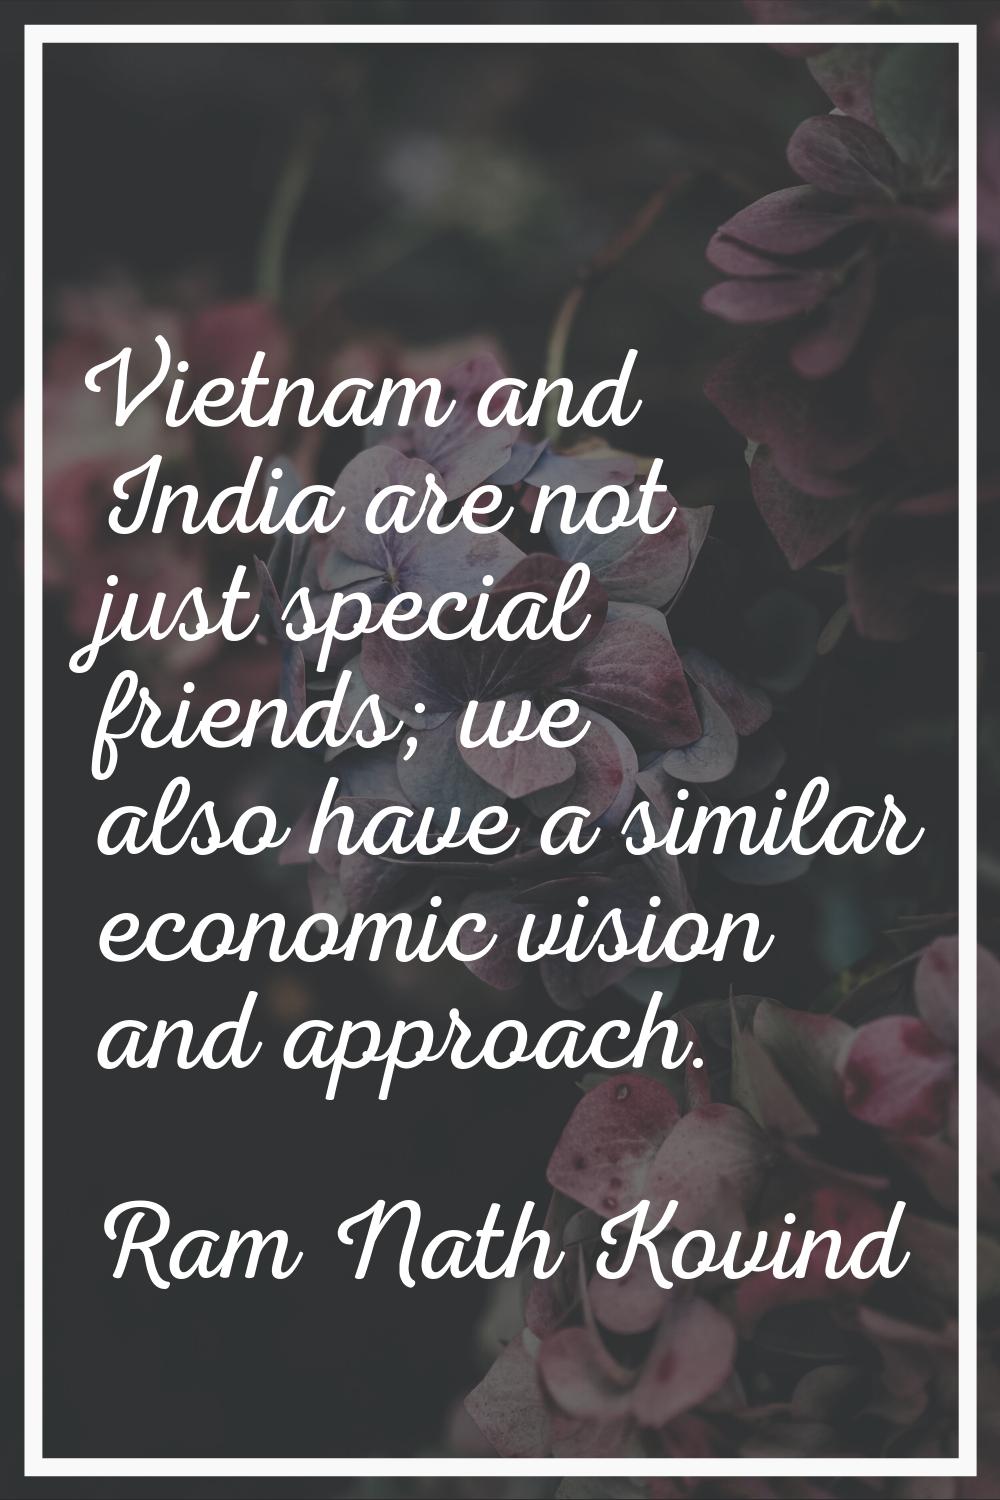 Vietnam and India are not just special friends; we also have a similar economic vision and approach